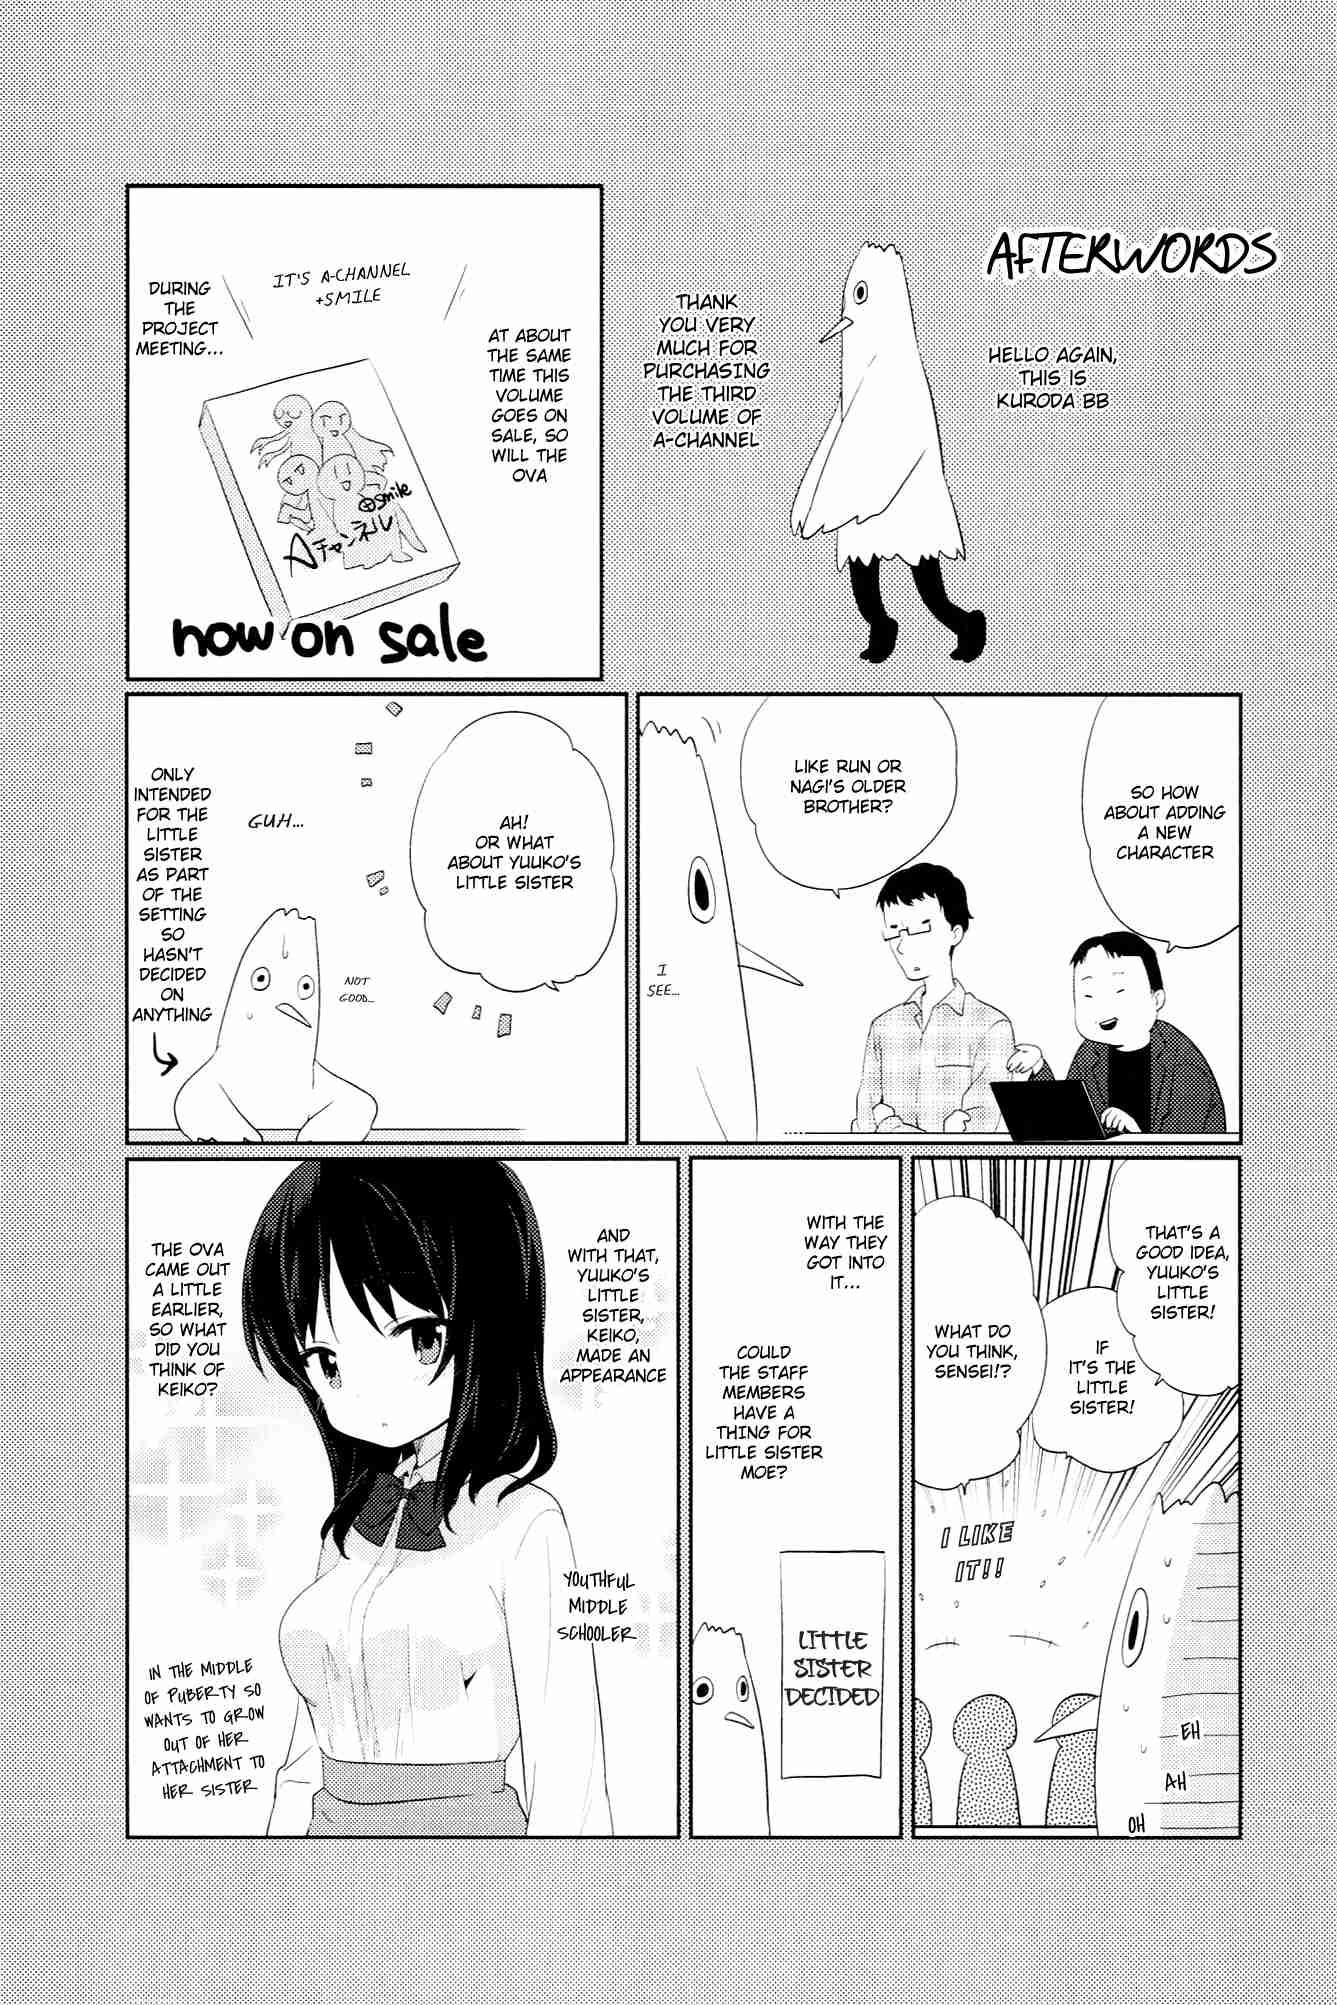 A-Channel Vol.3 Ch.43